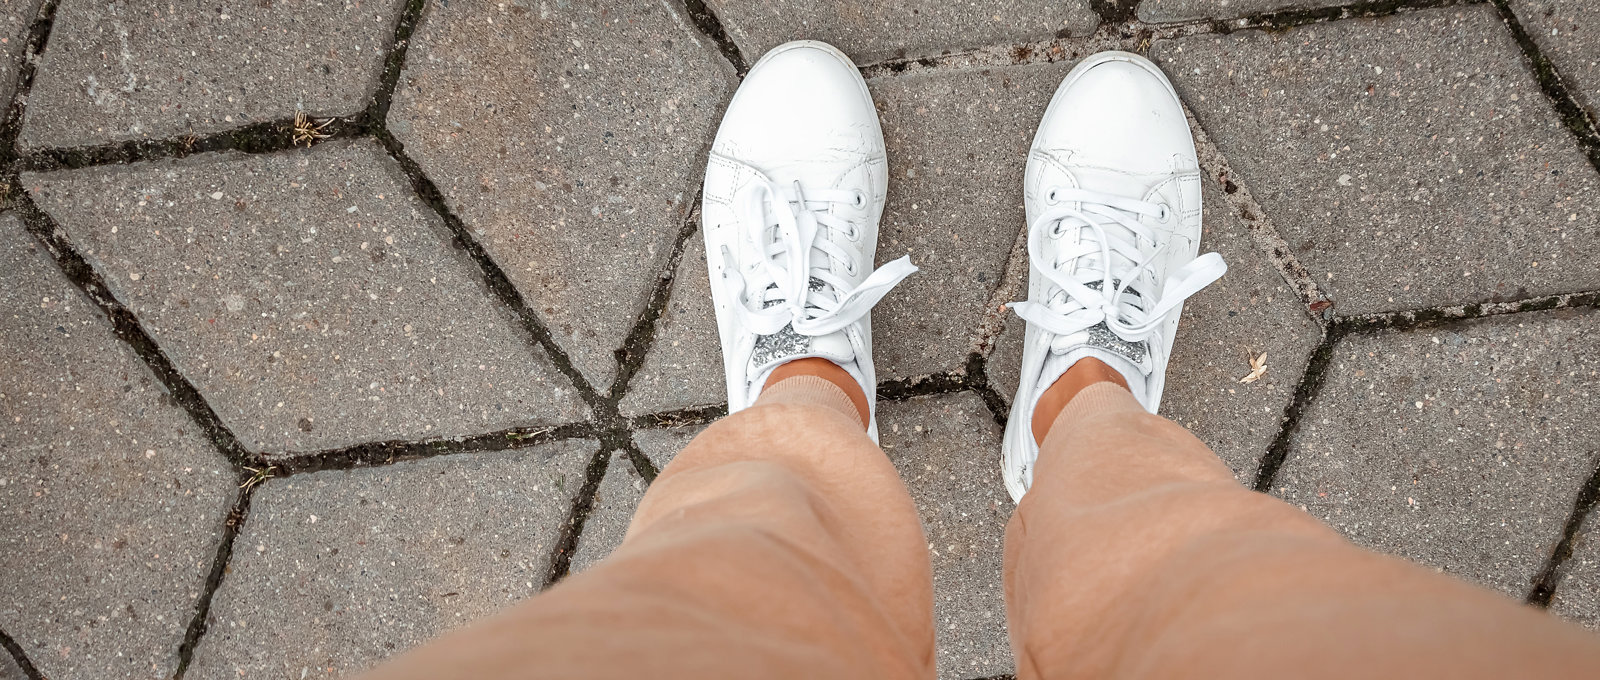 Photograph of a woman's feet on the ground in white trainers, shot looking down